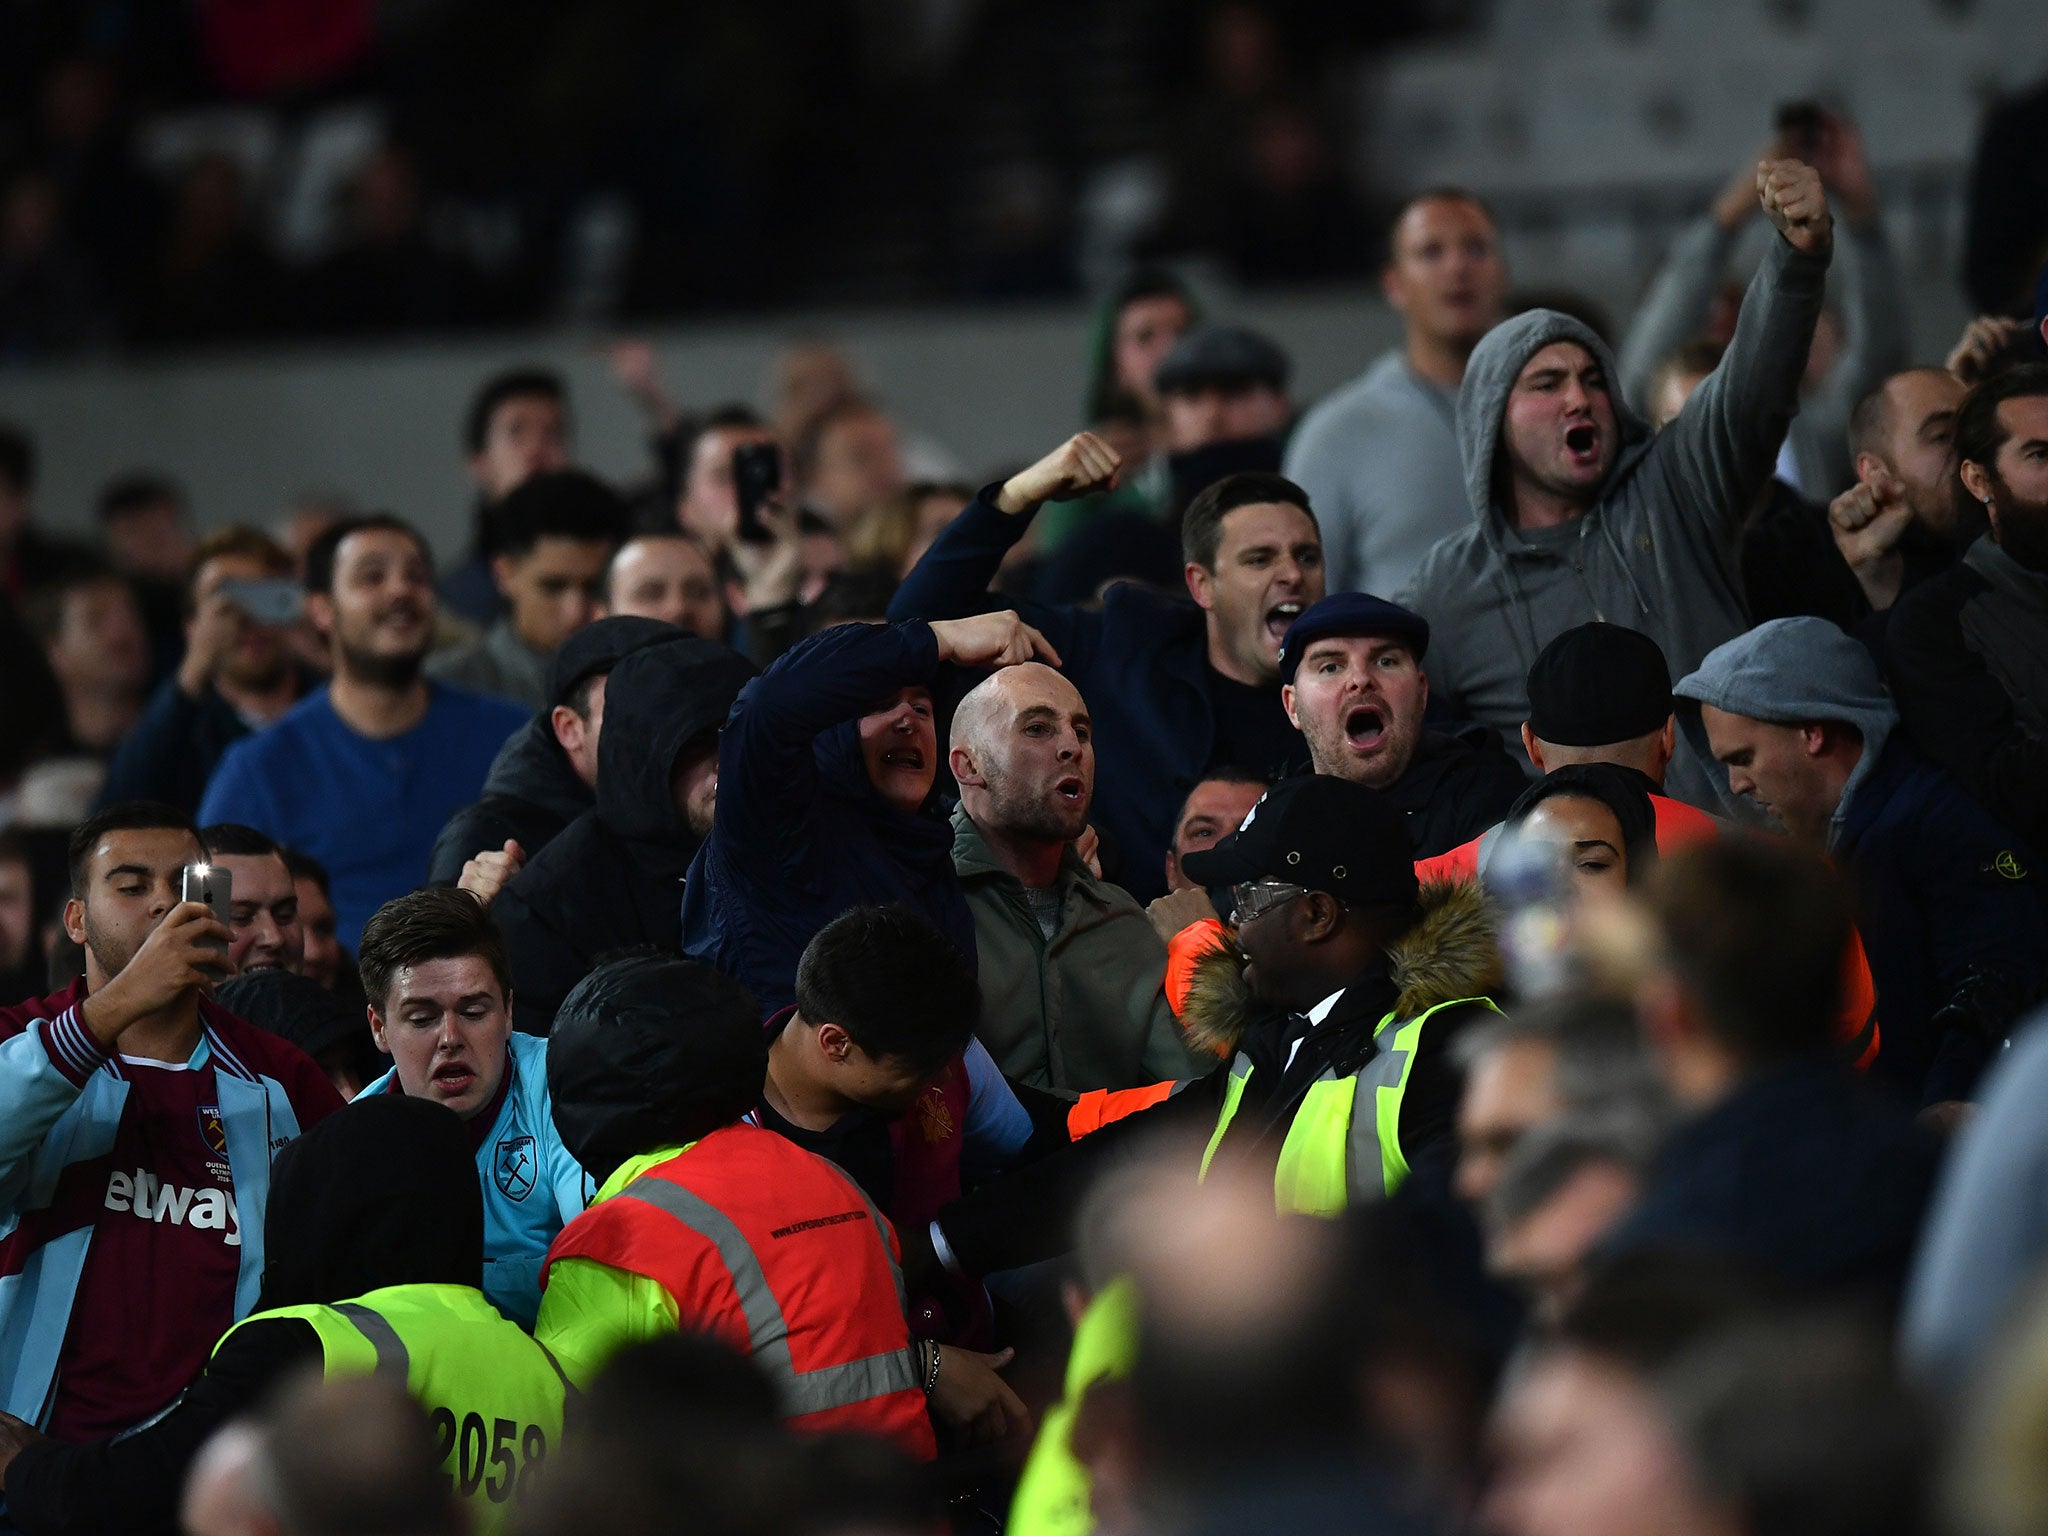 &#13;
Sections of the London Stadium descended into violence following West Ham's EFL Clash with Chelsea &#13;